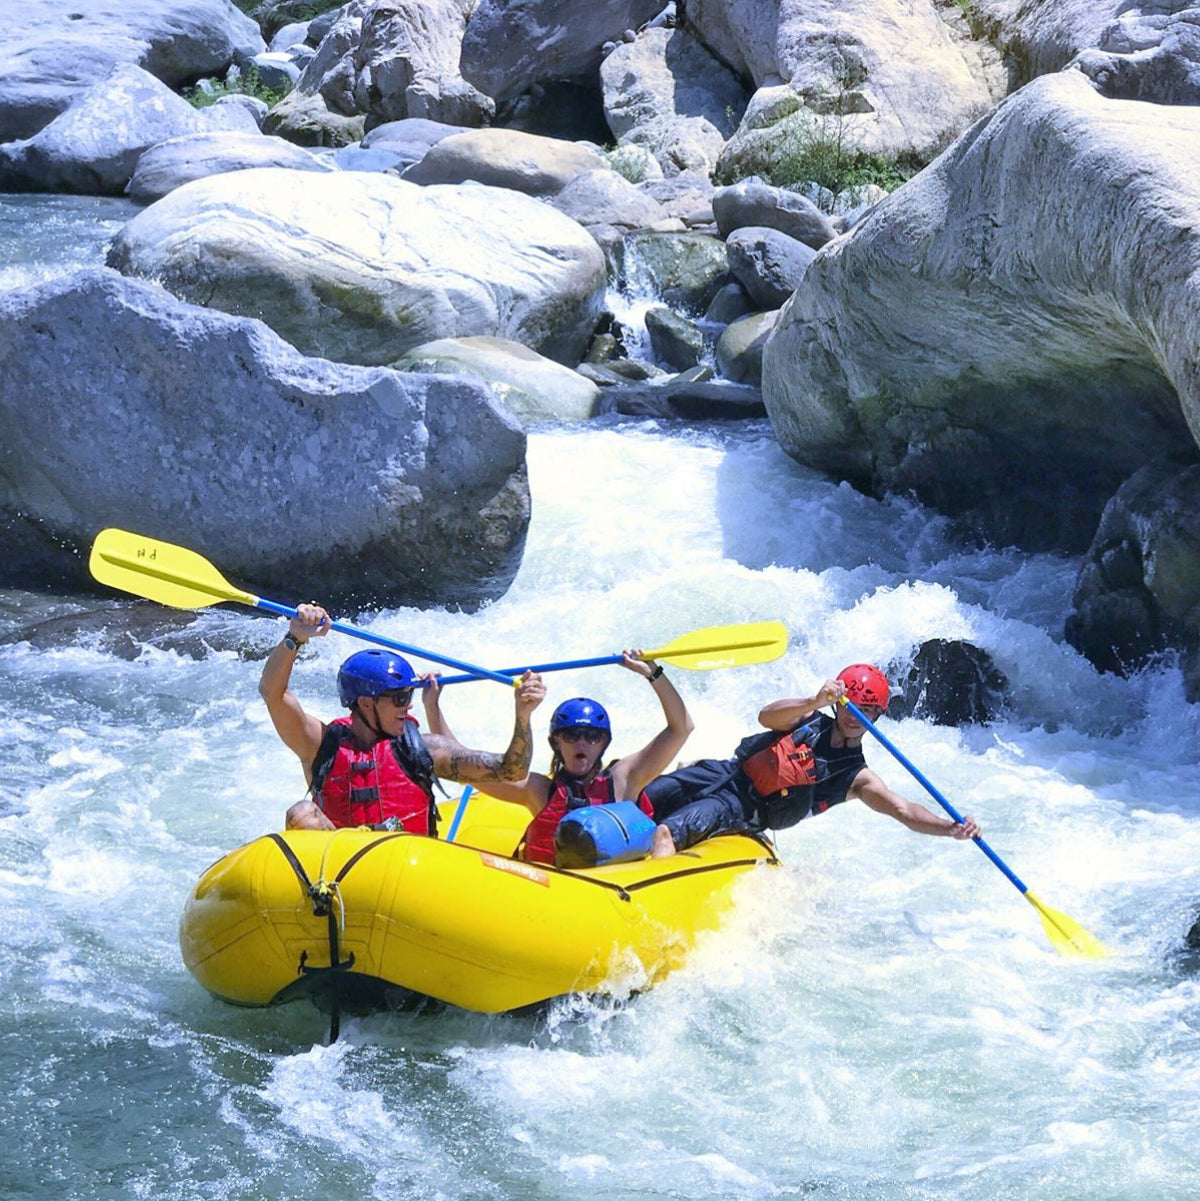 The Skog A Kust waterproof DrySaks dry bas are being used by a group whitewater rafting in a yellow raft